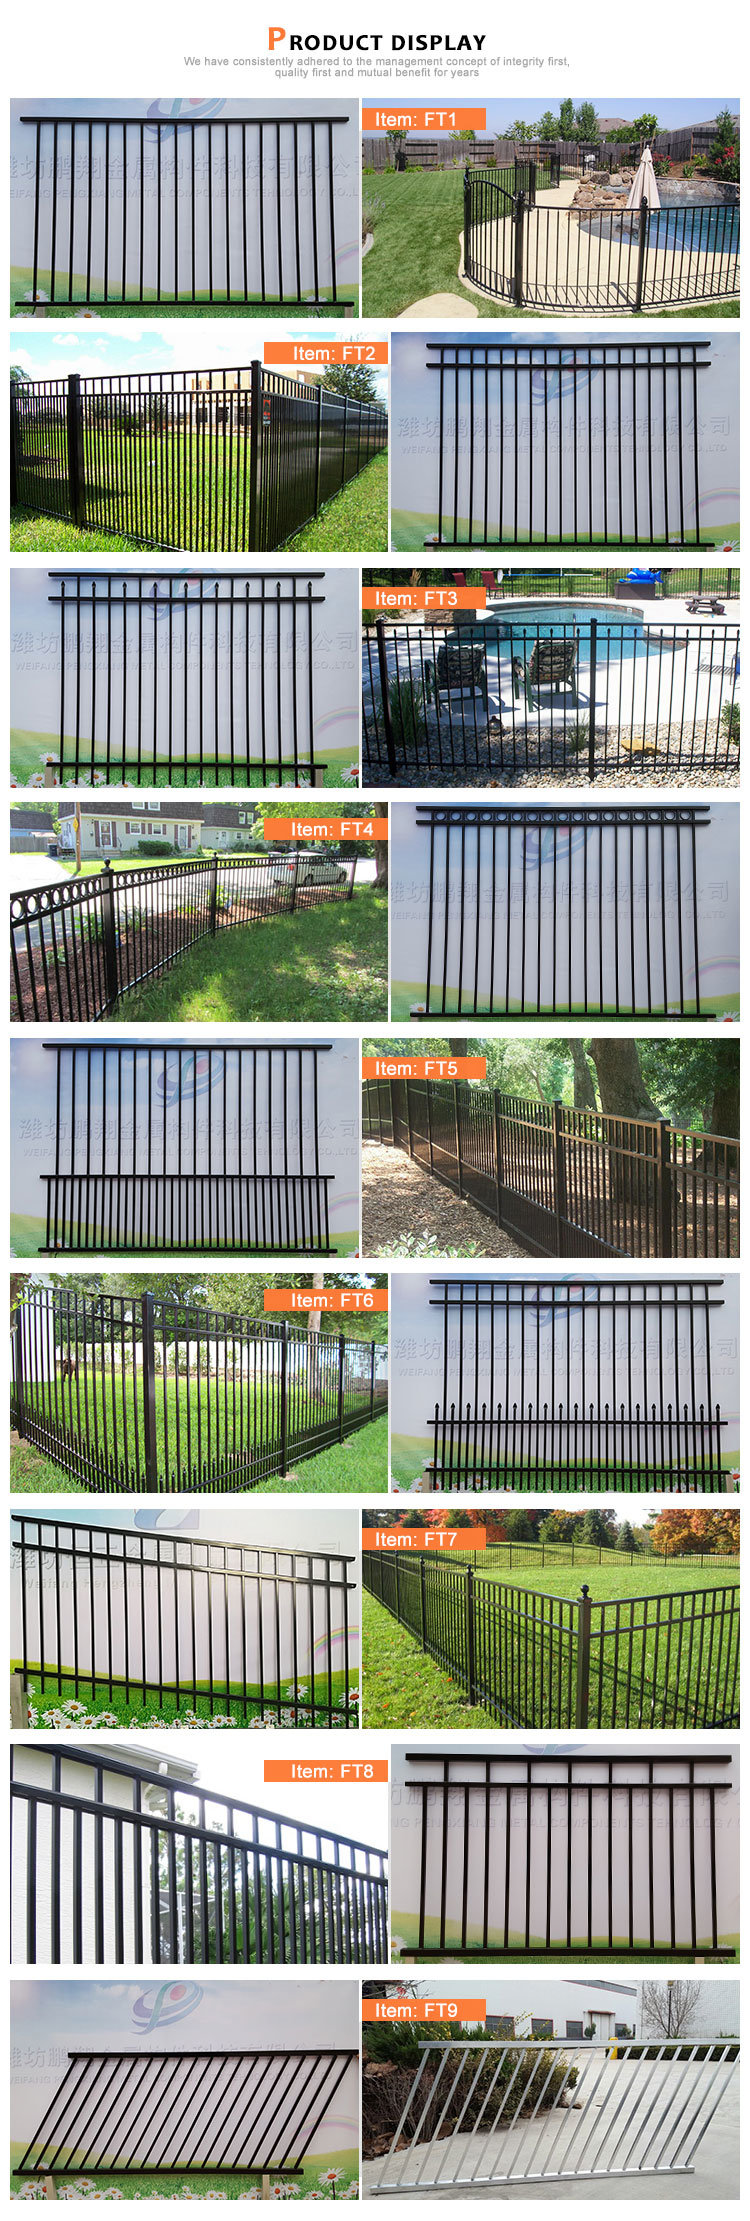 Powder Coated Safety Fence/ Garden Fence/Wrought Iron Fence/Swimming Pool Fence/ Security Fencing /Steel Fencing